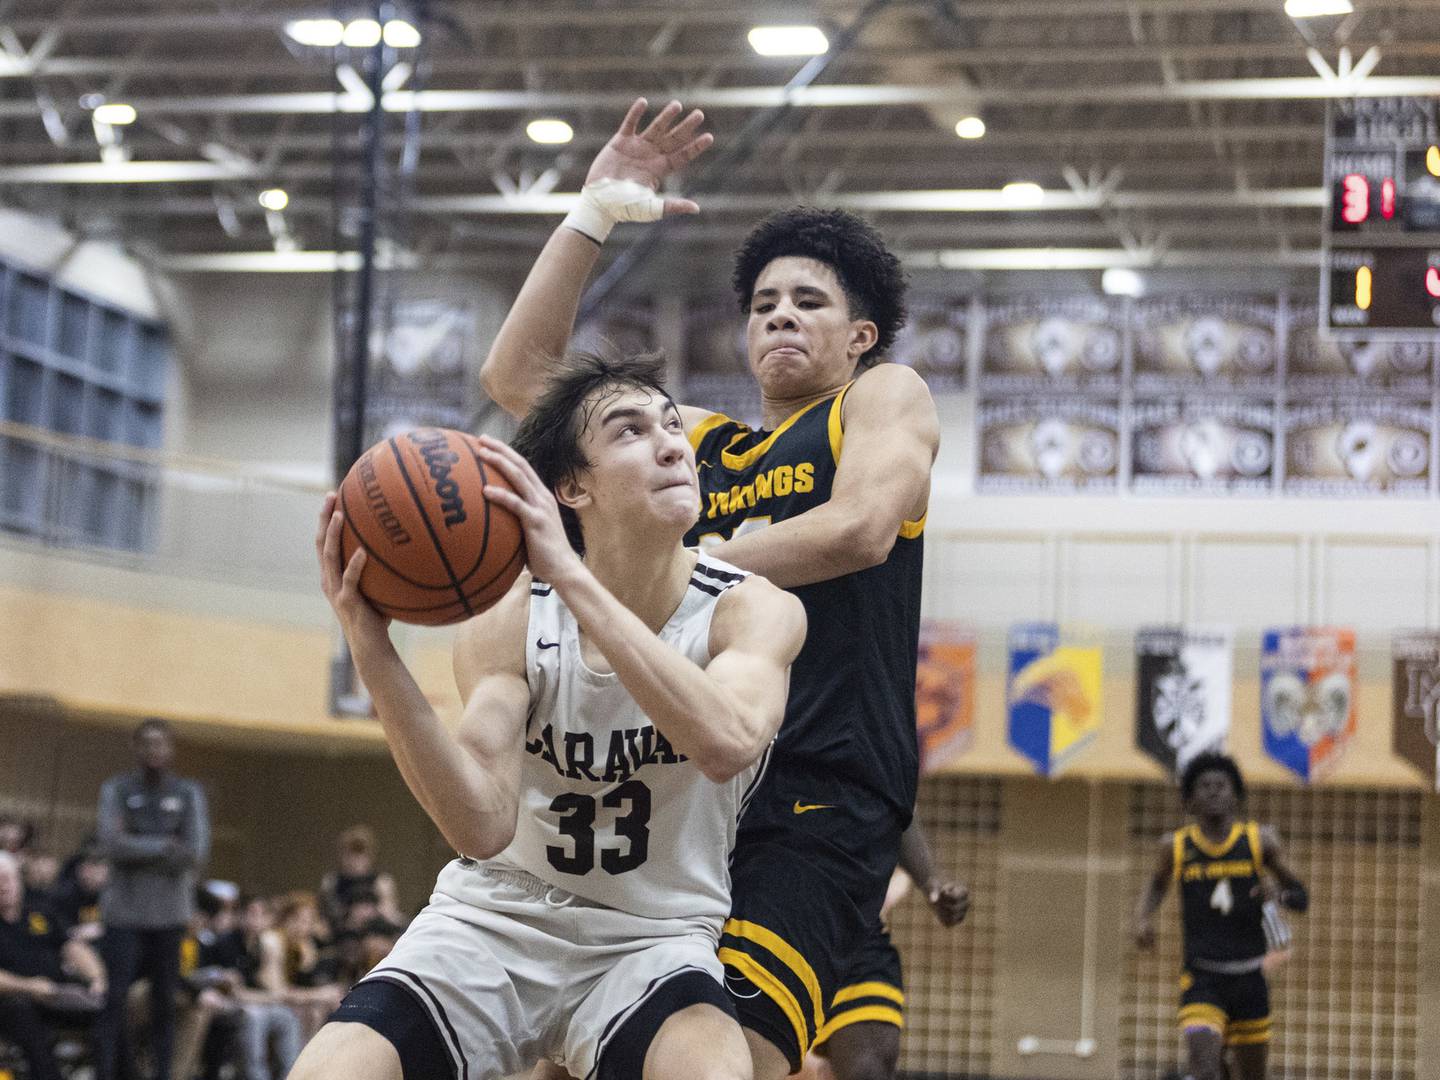 Mount Carmel's Angelo Ciaravino (33) drives to the basket as St. Laurence's Jacob Rice defends during a Catholic League crossover in Chicago on Tuesday, Dec. 6, 2022.